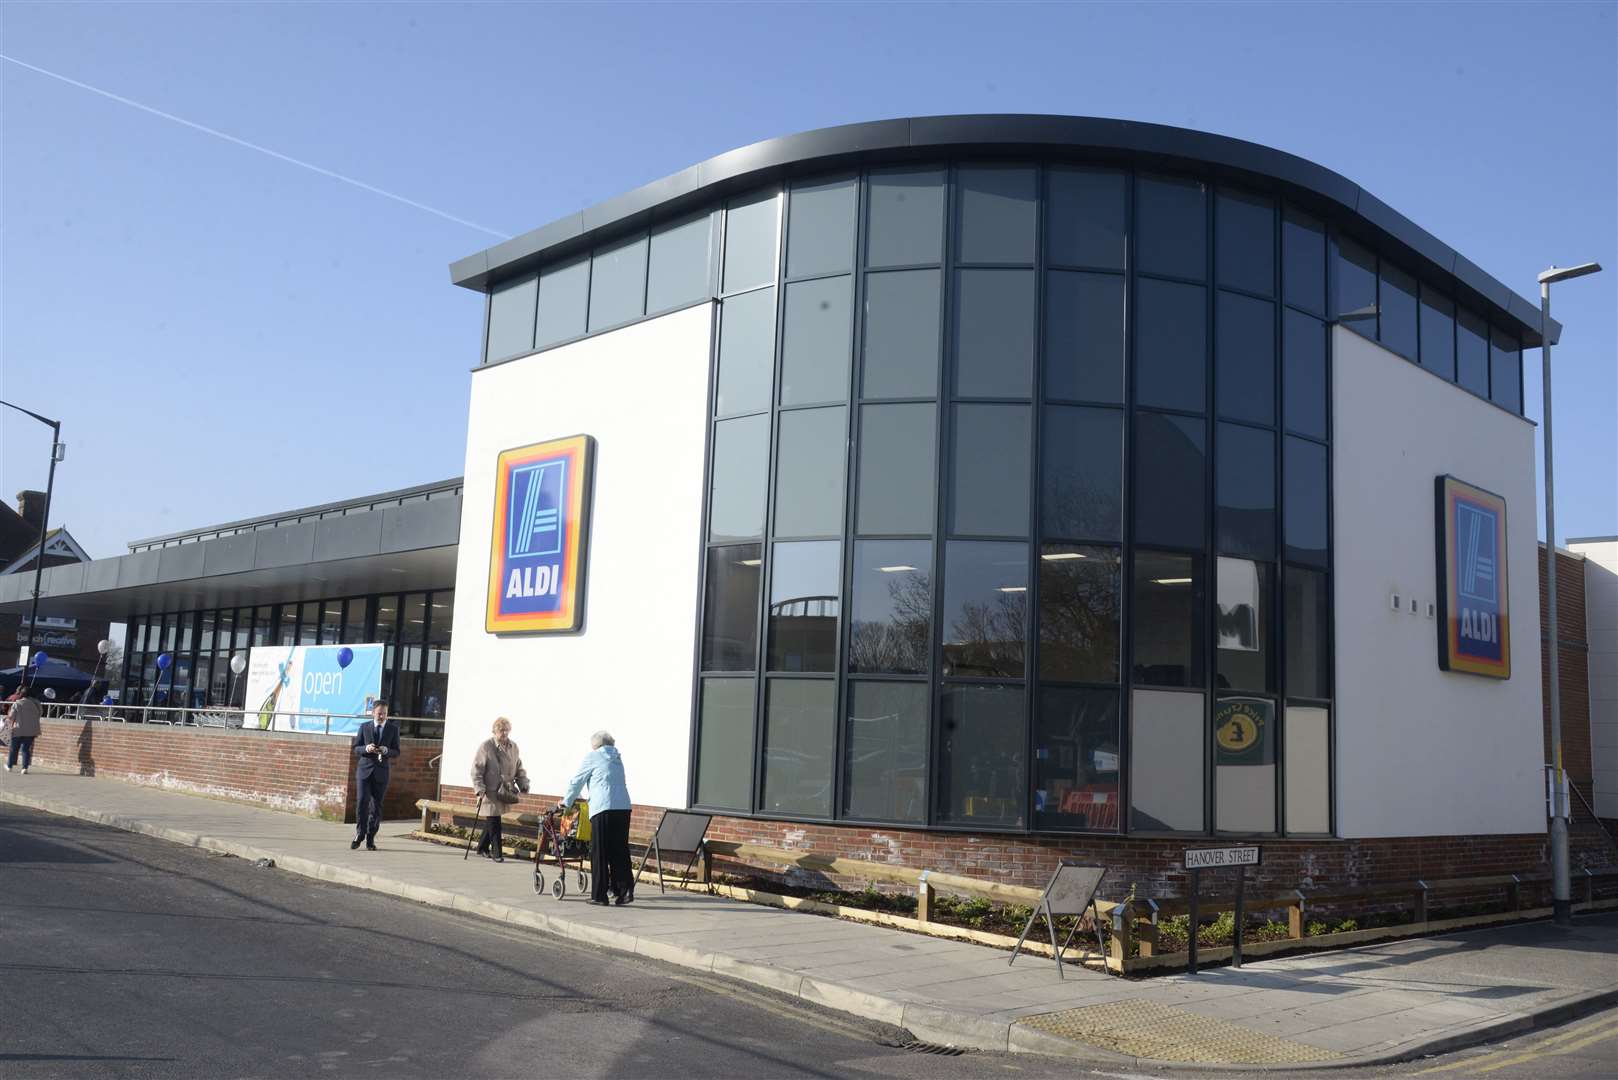 The theft took place at Herne Bay's Aldi branch on Monday. Picture: Chris Davey